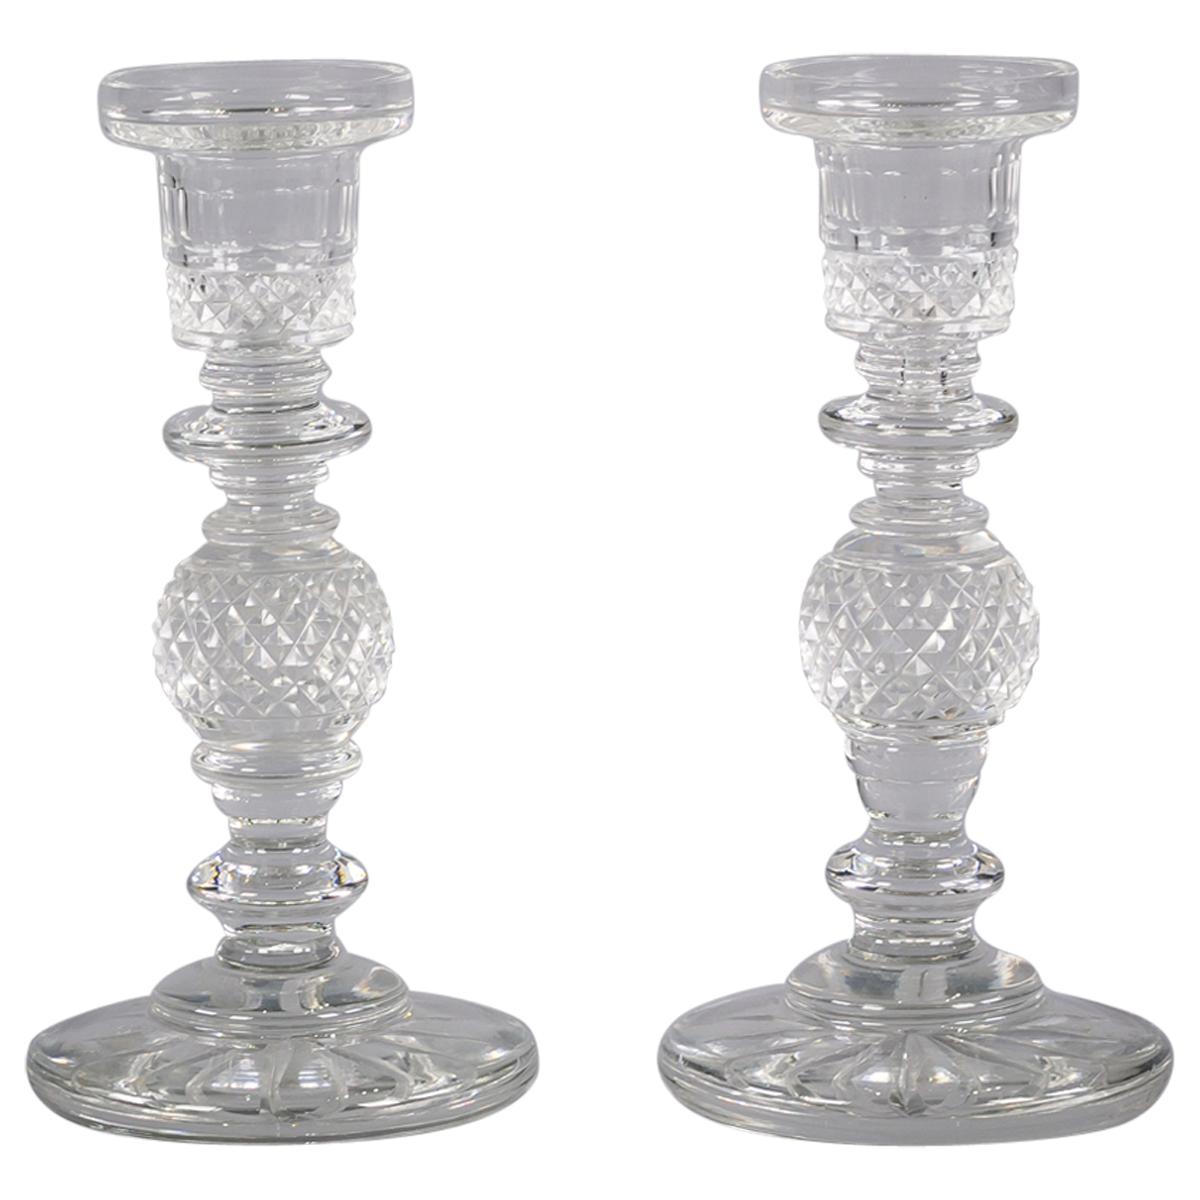 Pair of Anglo Irish Cut and Faceted Glass Candlesticks, circa 1820